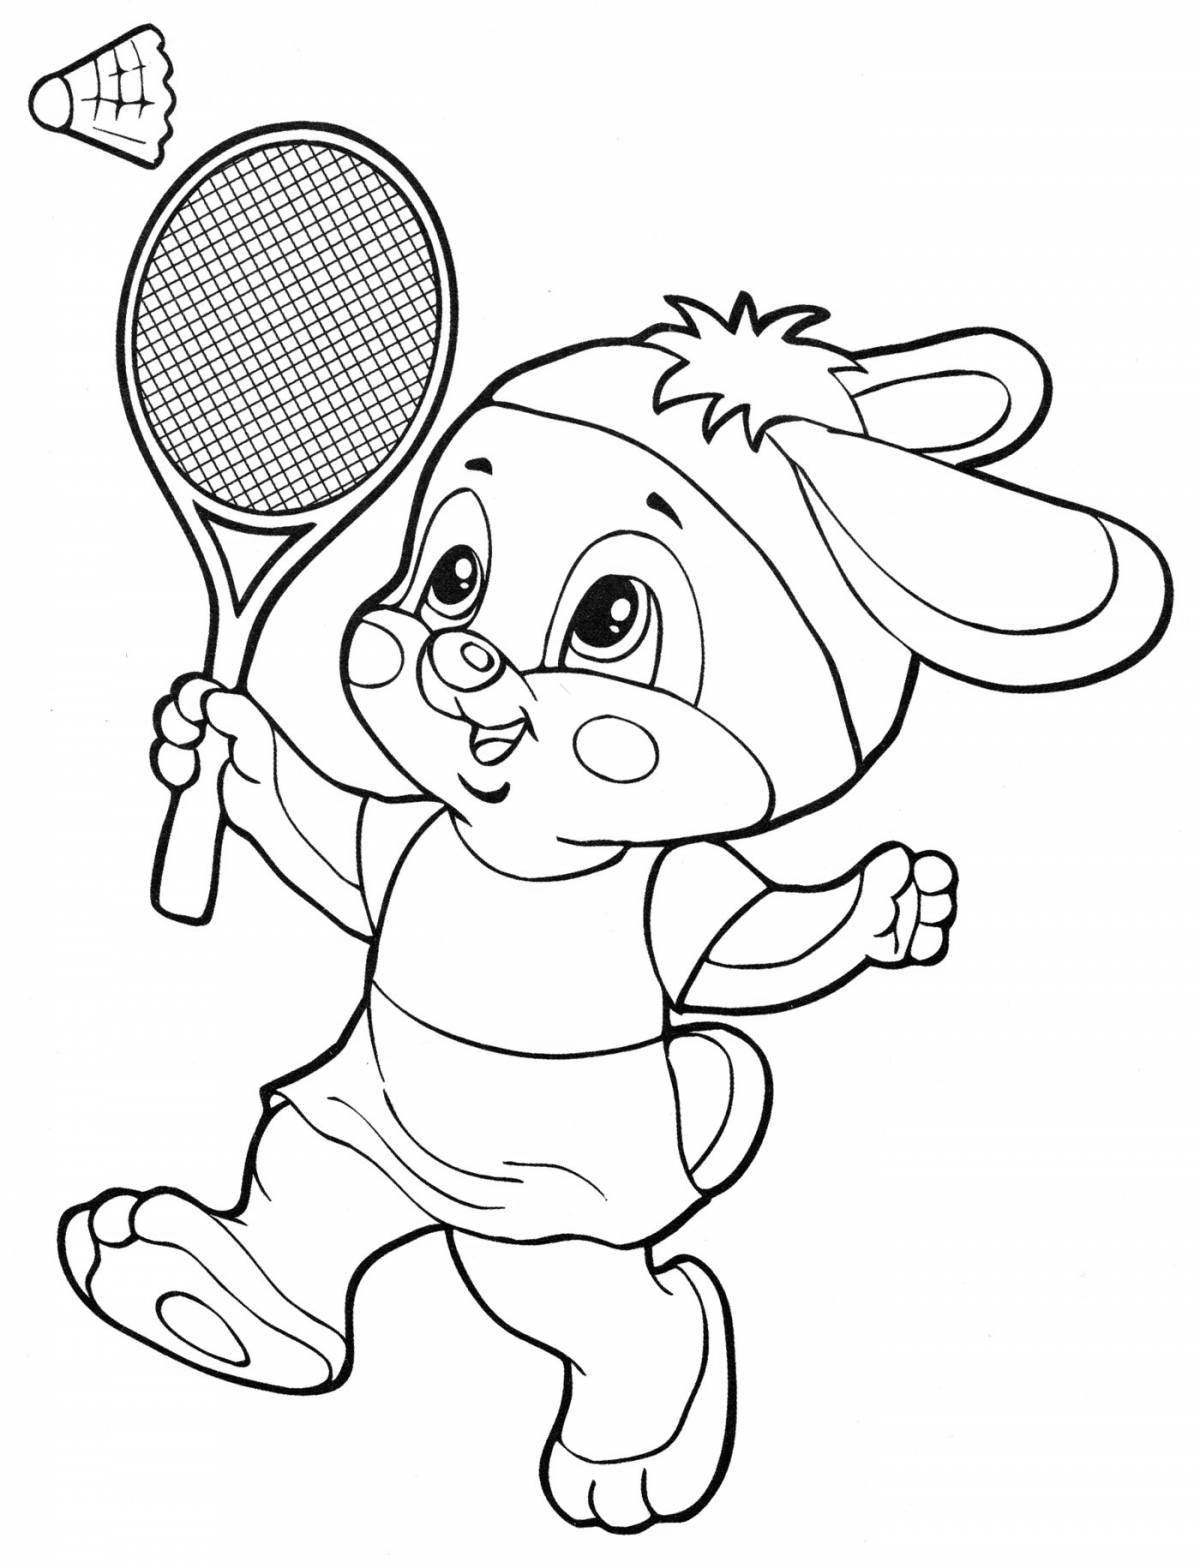 Awesome sports coloring pages for 5-6 year olds